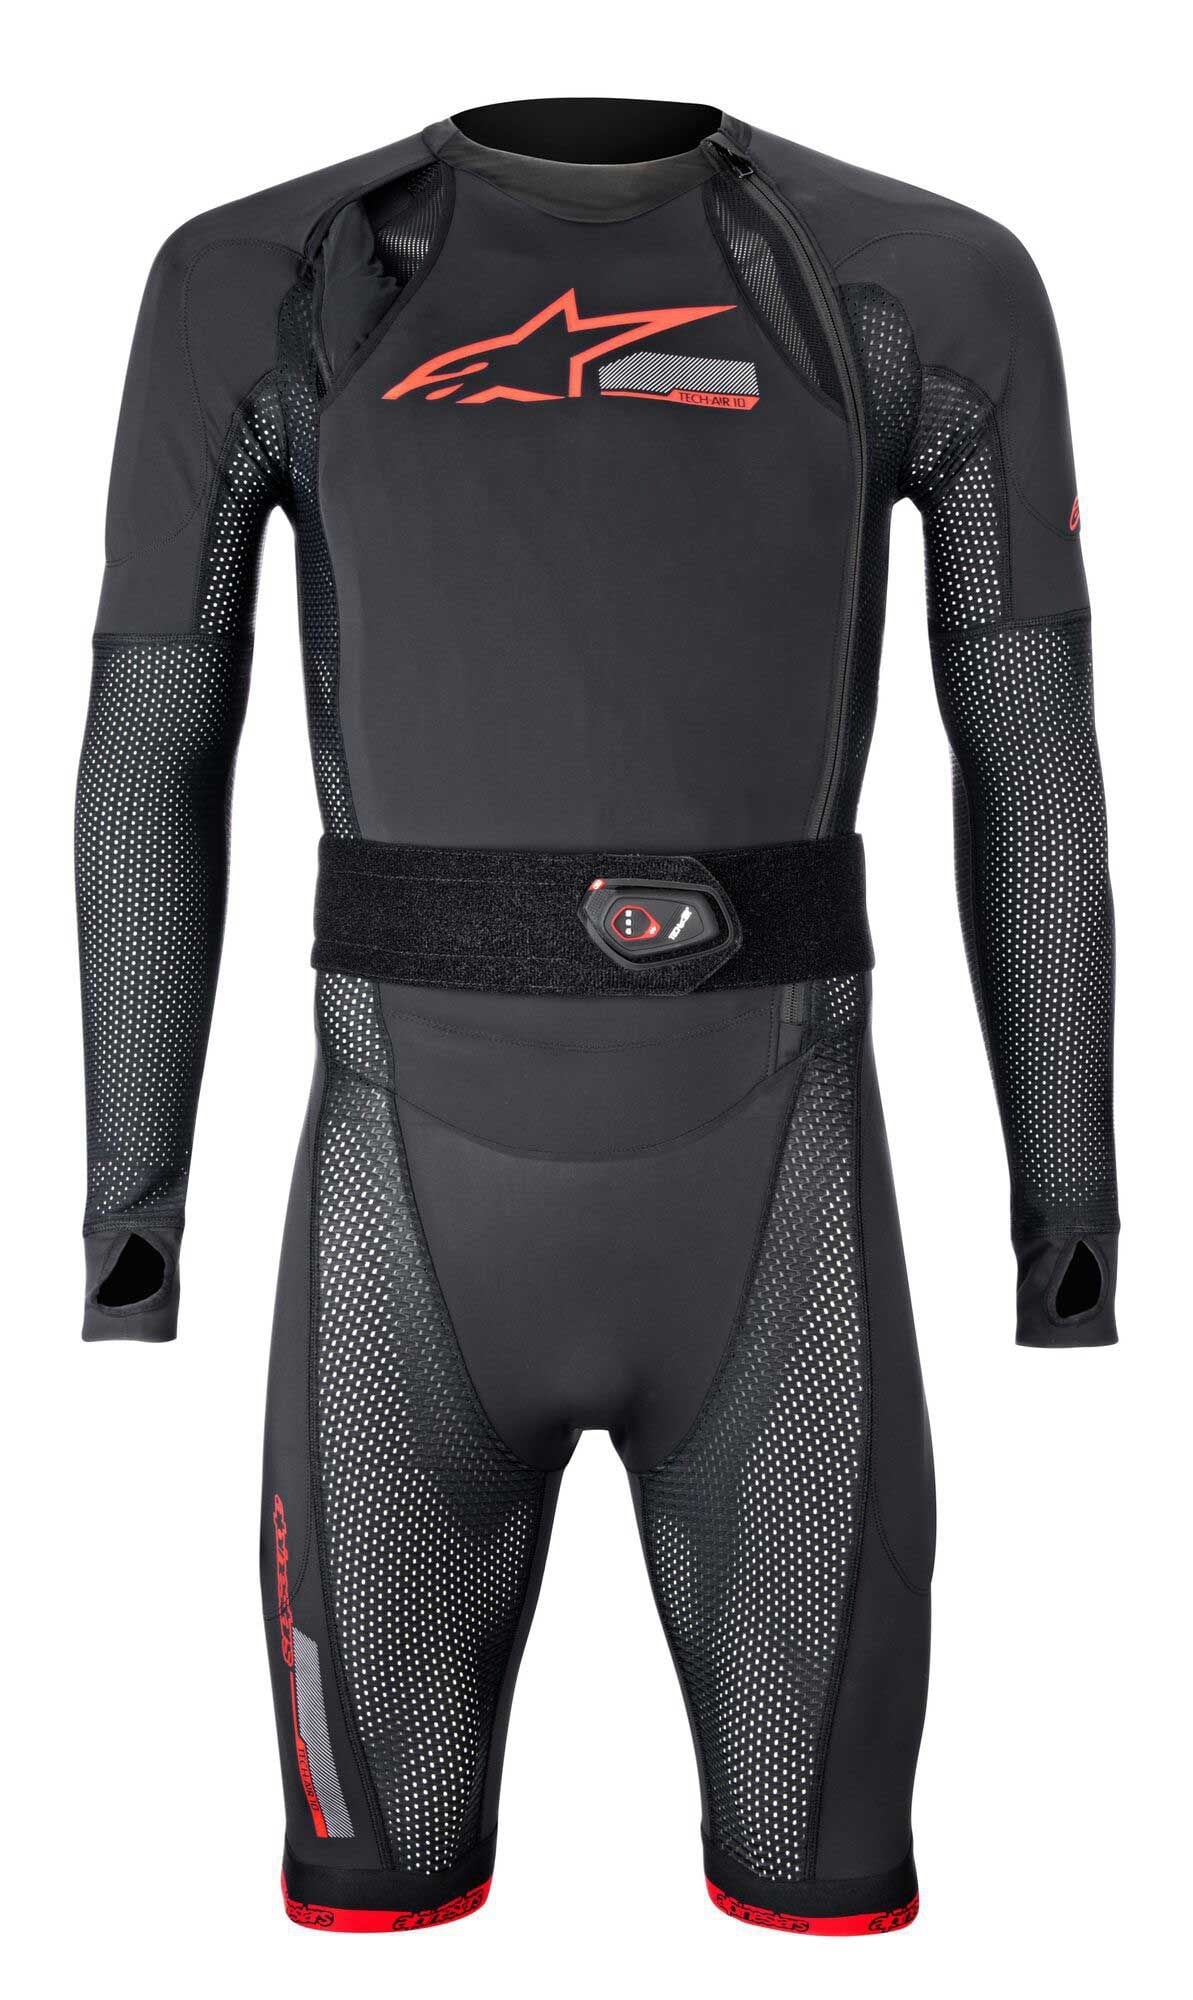 Racers and trackday riders can use the Tech-Air 10 under just about any riding suit as long as there’s appropriate clearance in the chest and hips.